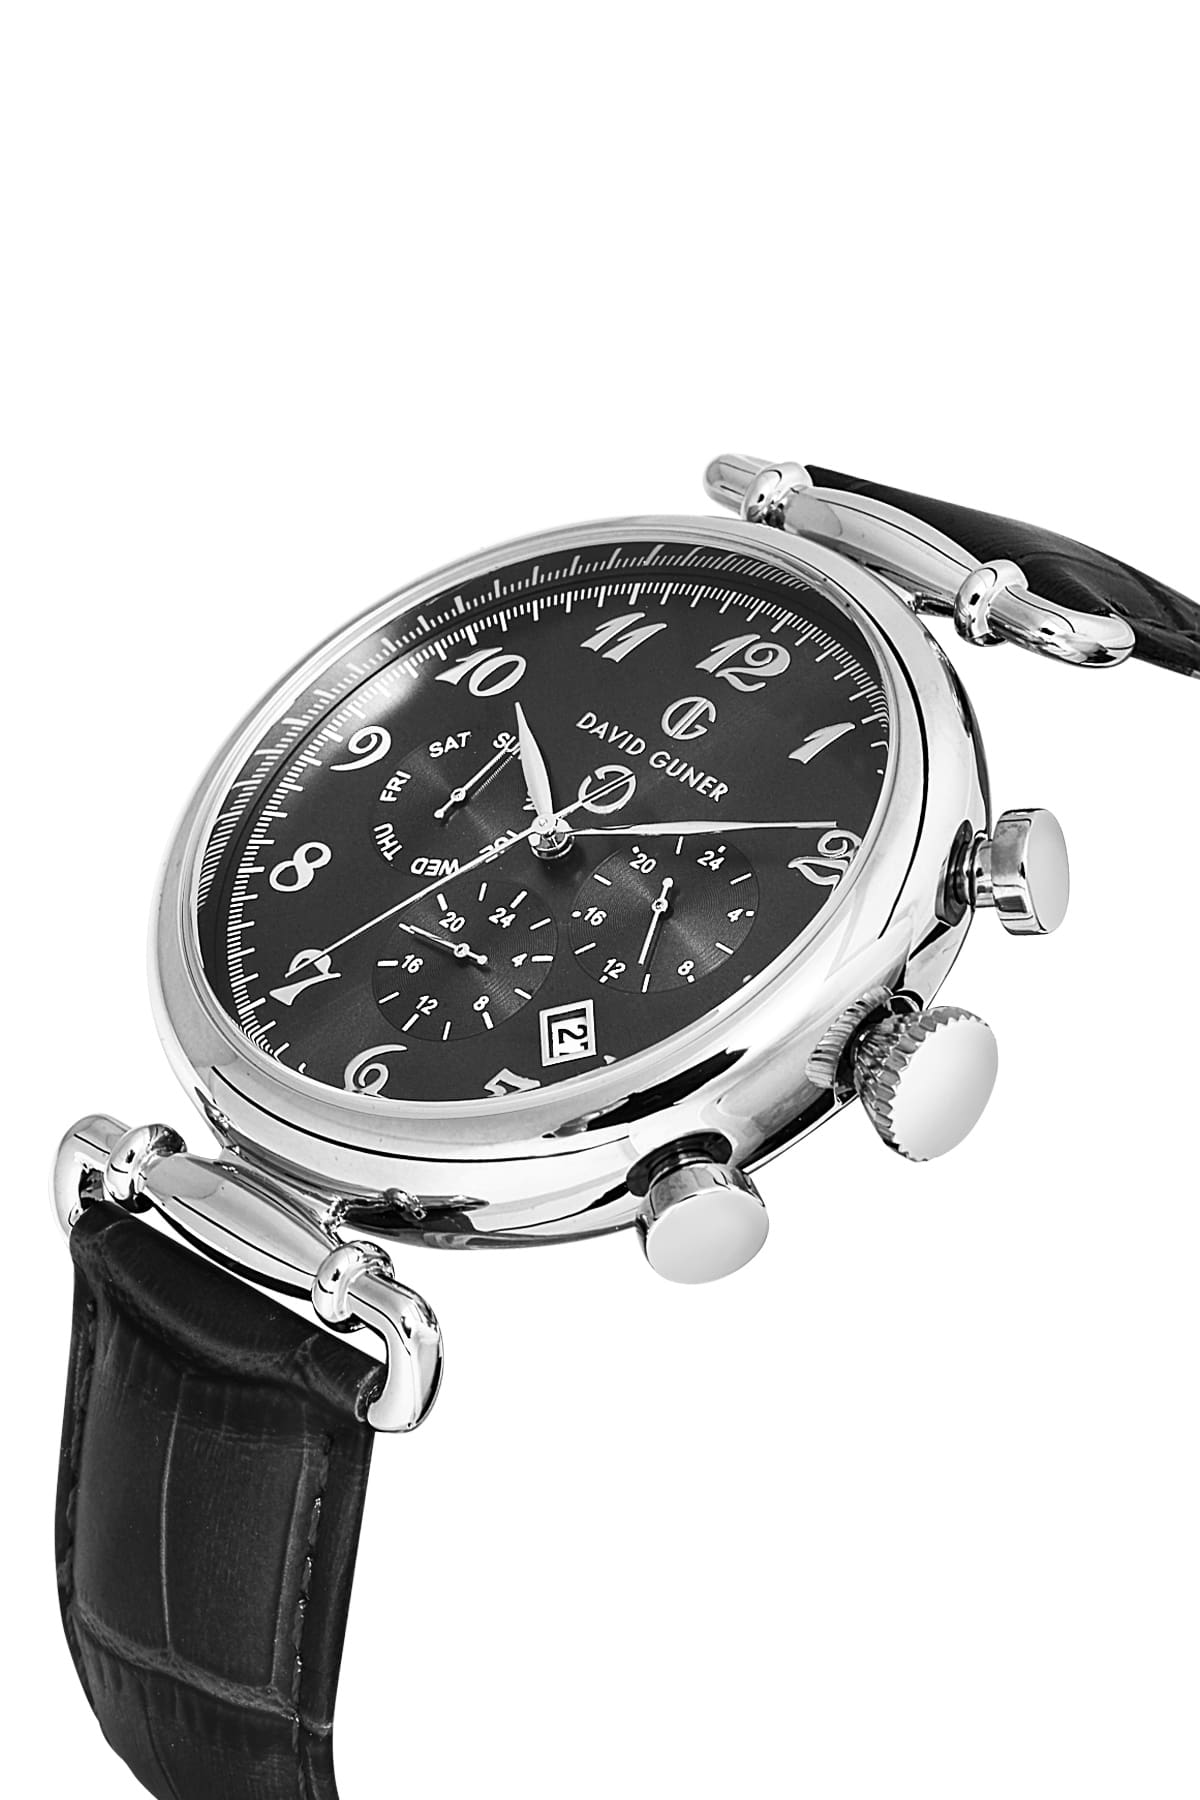 DAVID GUNER Men's Watch with Black Dial and Black Leather Strap